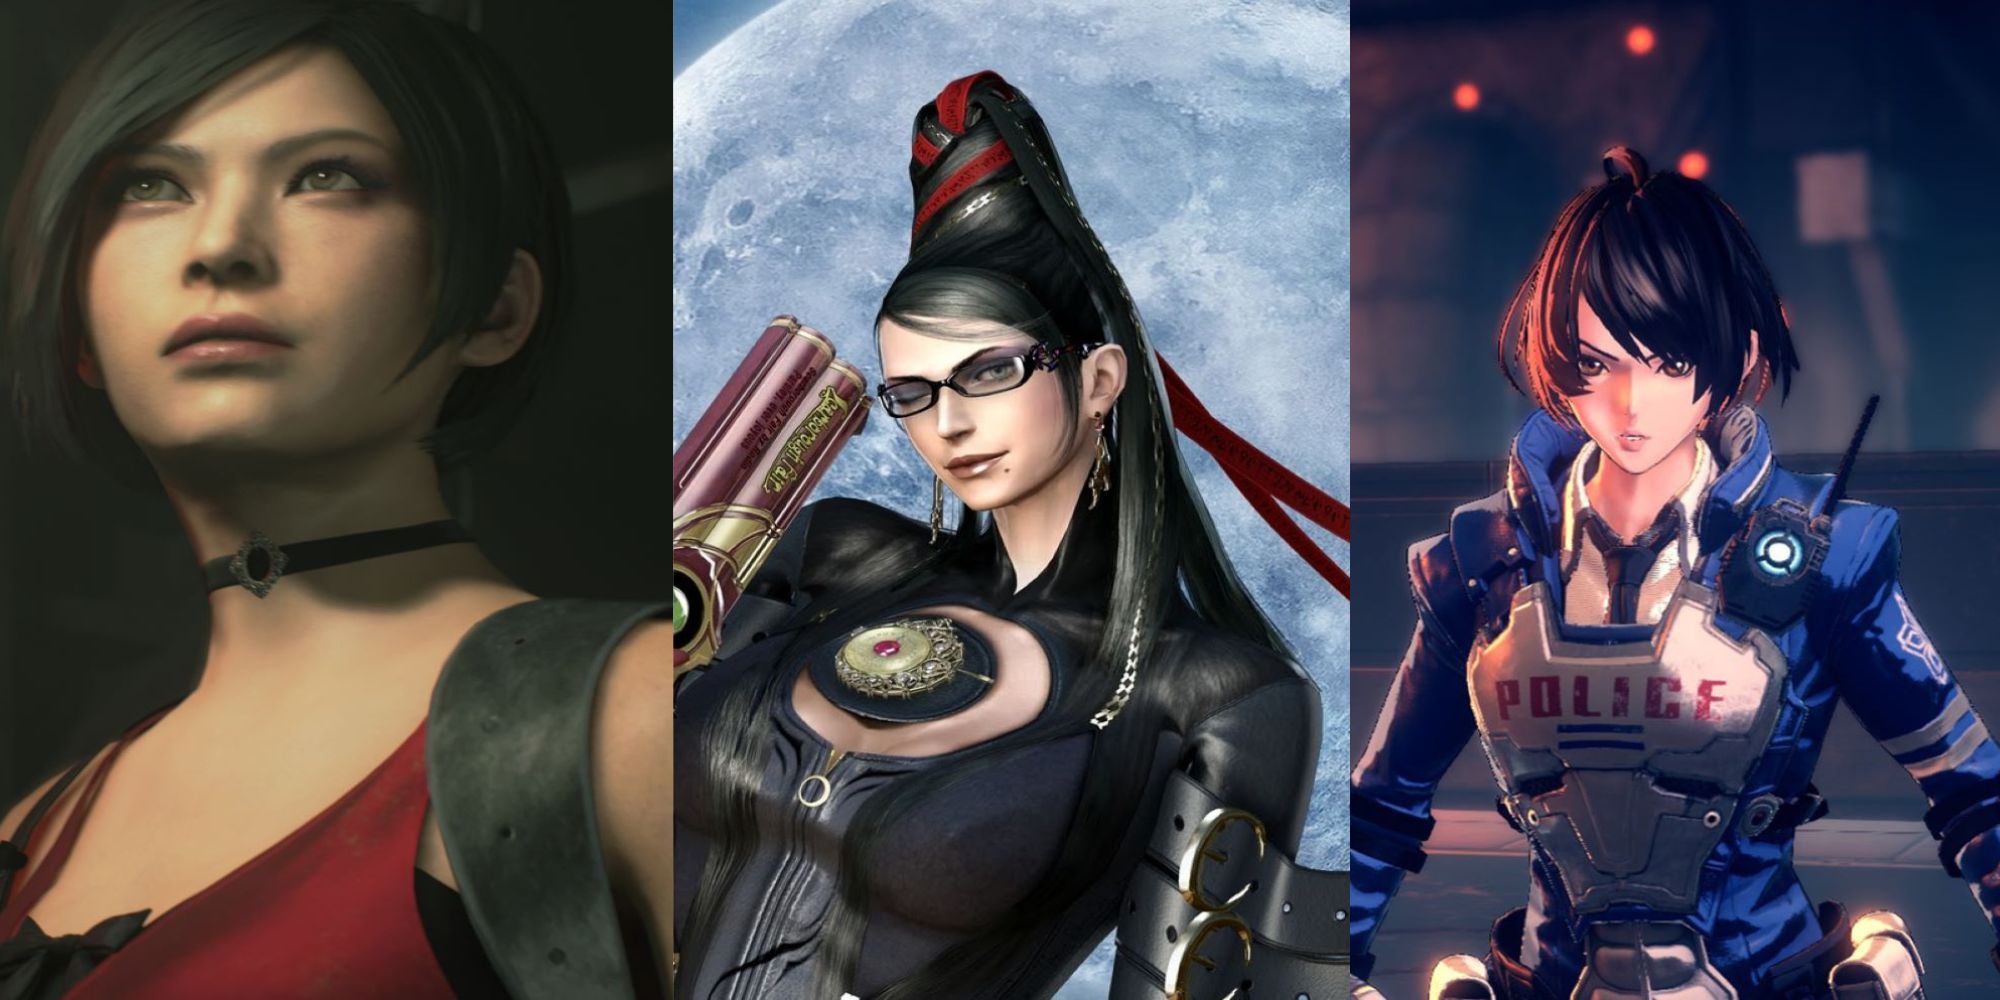 A collage featuring Ada Wong, Bayonetta, and the Astral Chain female protagonist.